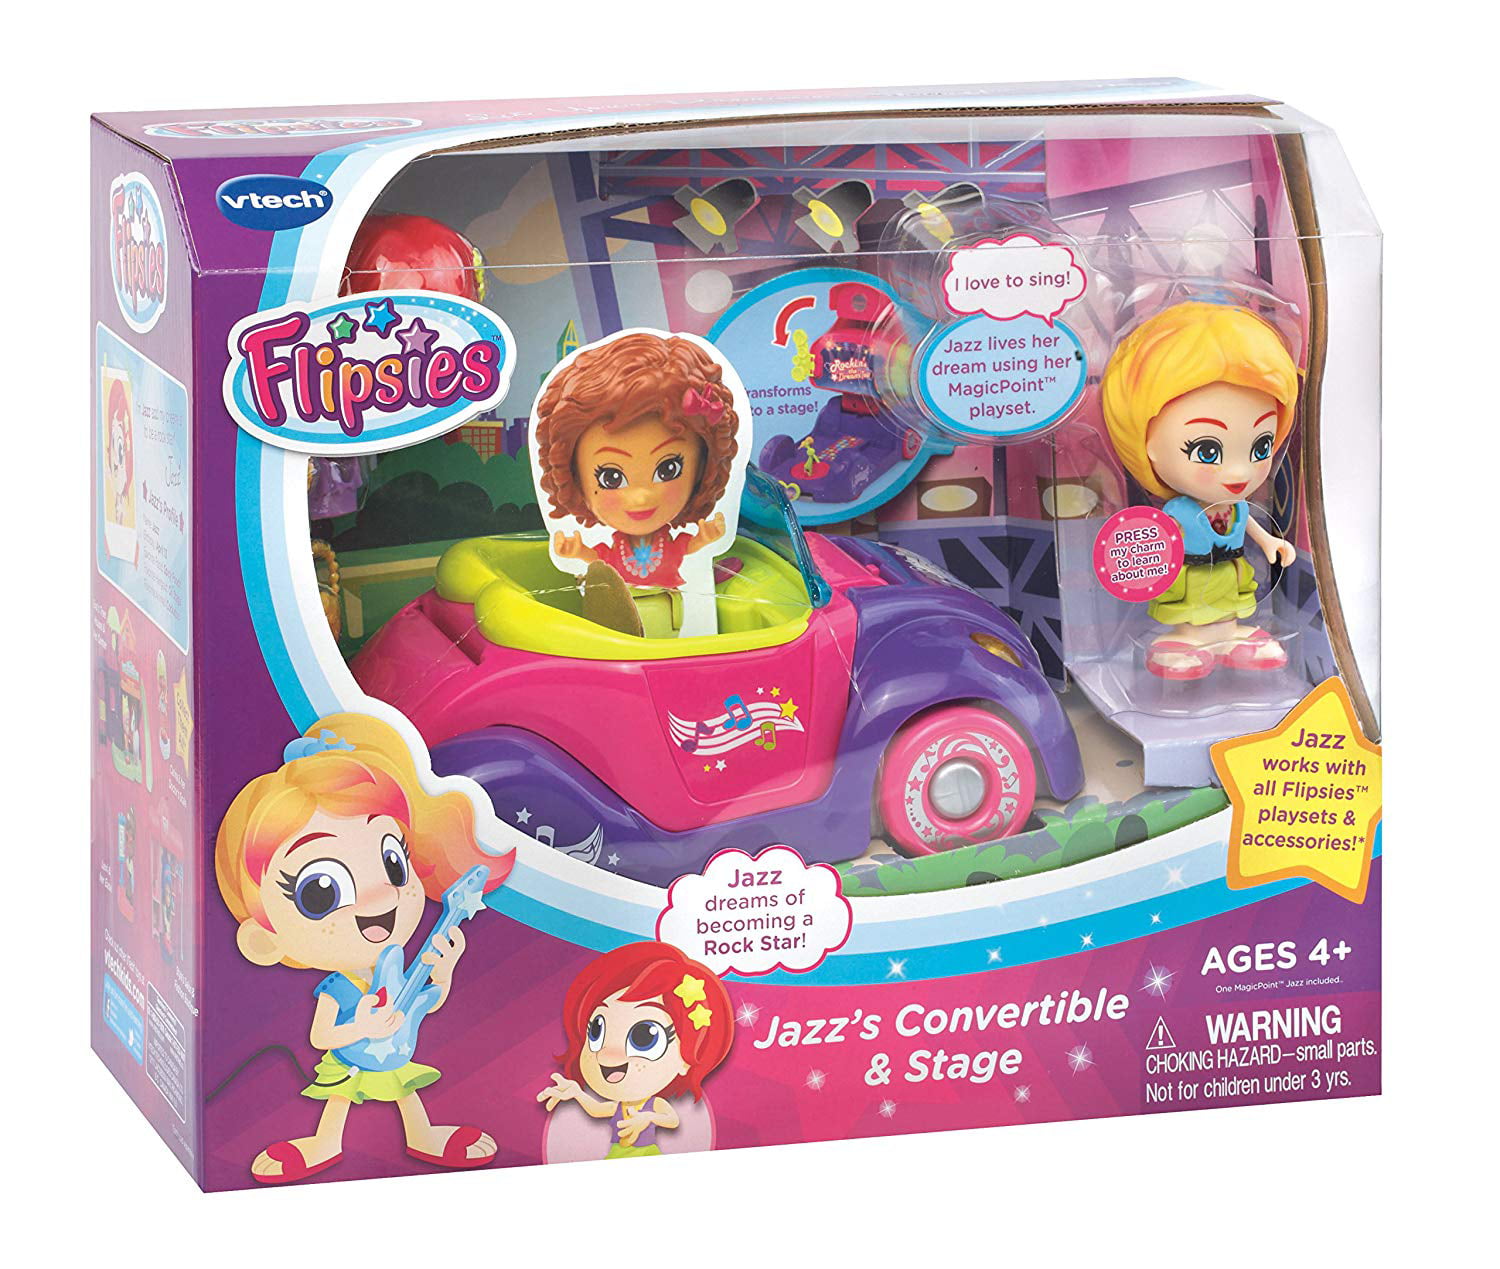 vTech Flipsies Jazz & her Drum Kit Playset and Figure with 2 Outfits and Sound 